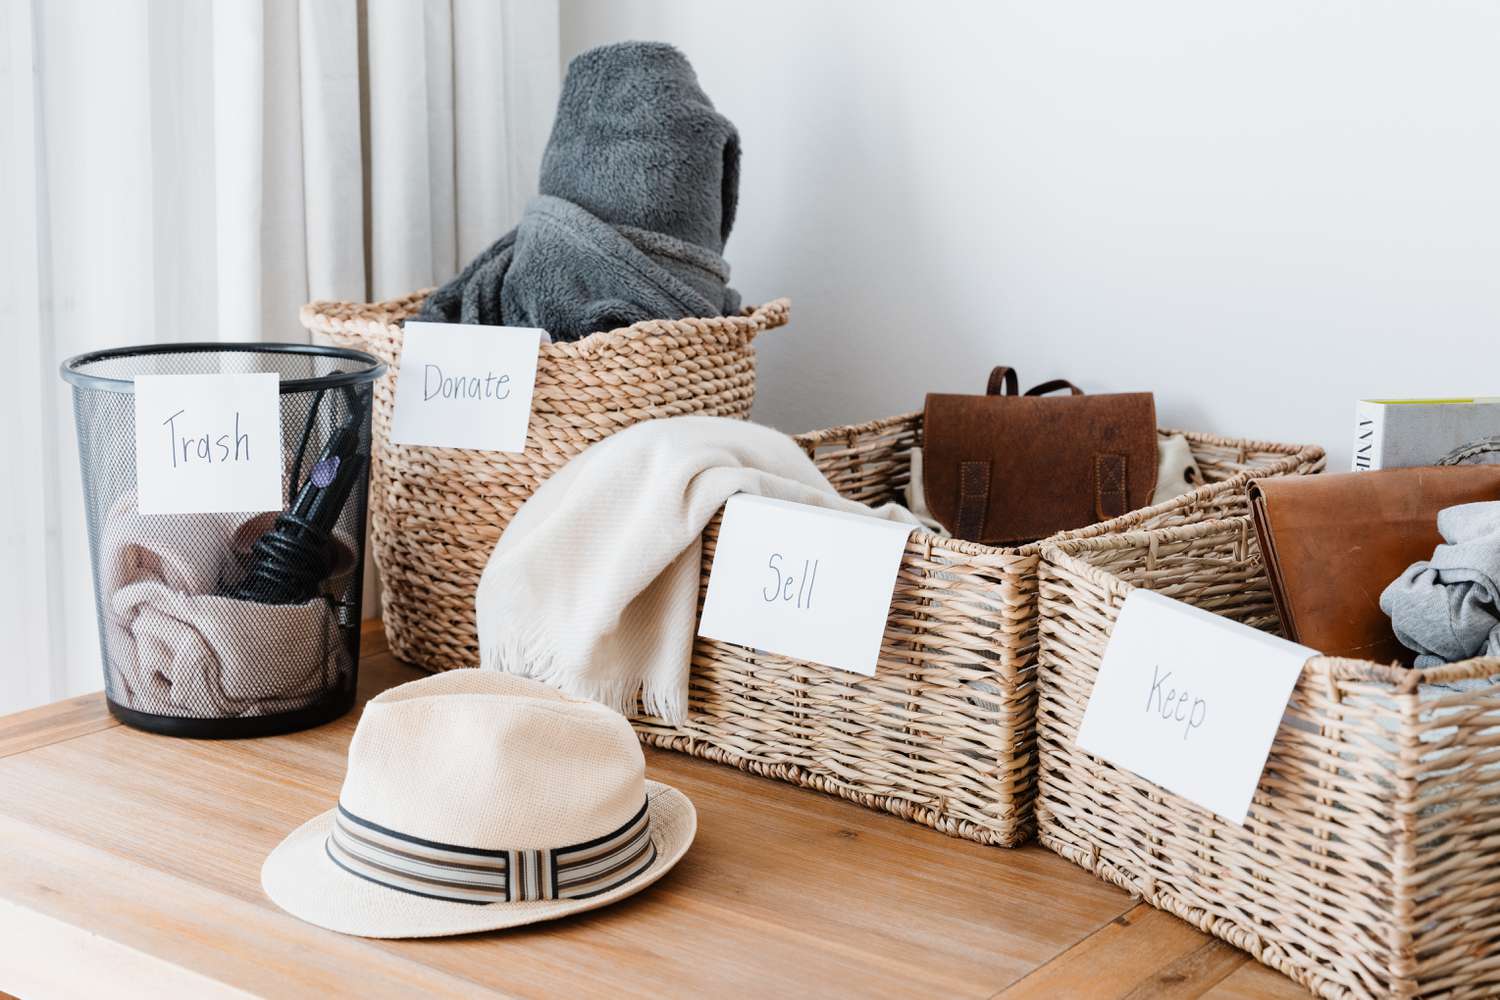 Household items being downsized and separated in wicker baskets